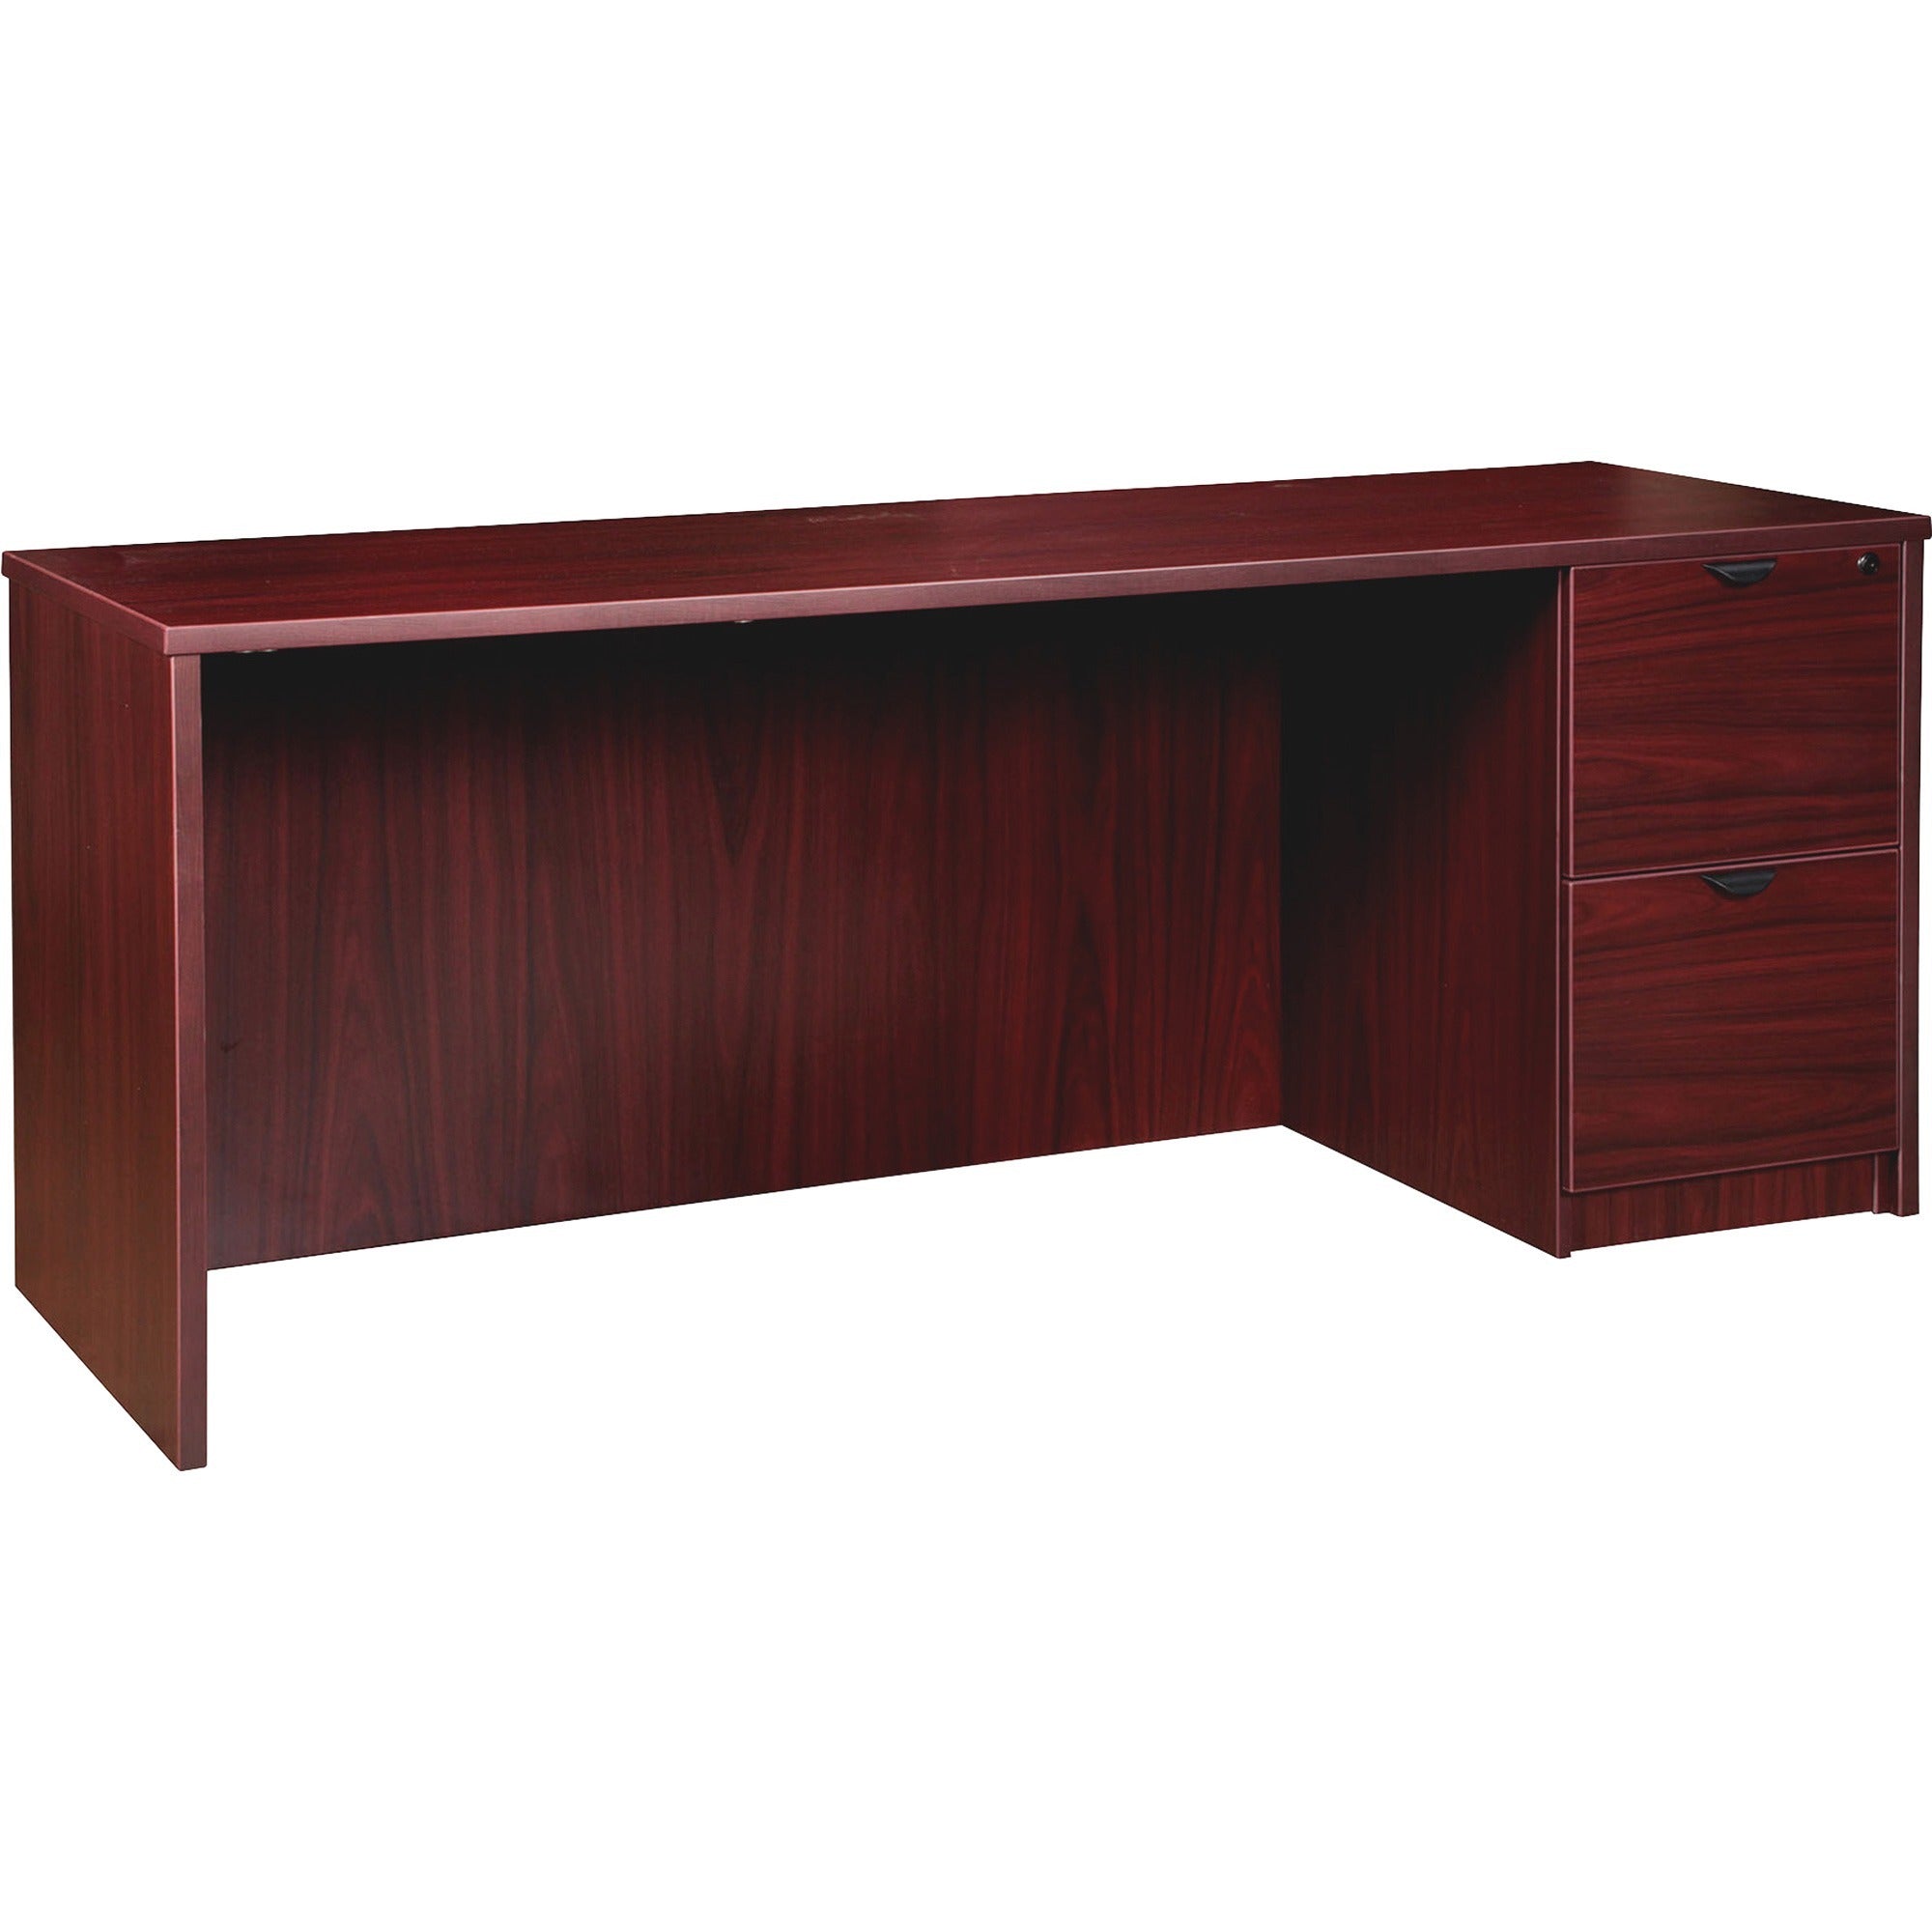 lorell-prominence-20-right-pedestal-credenza-66-x-2429--1-top-2-x-file-drawers-single-pedestal-on-right-side-band-edge-material-particleboard-finish-thermofused-melamine-tfm_llrpc2466rmy - 1